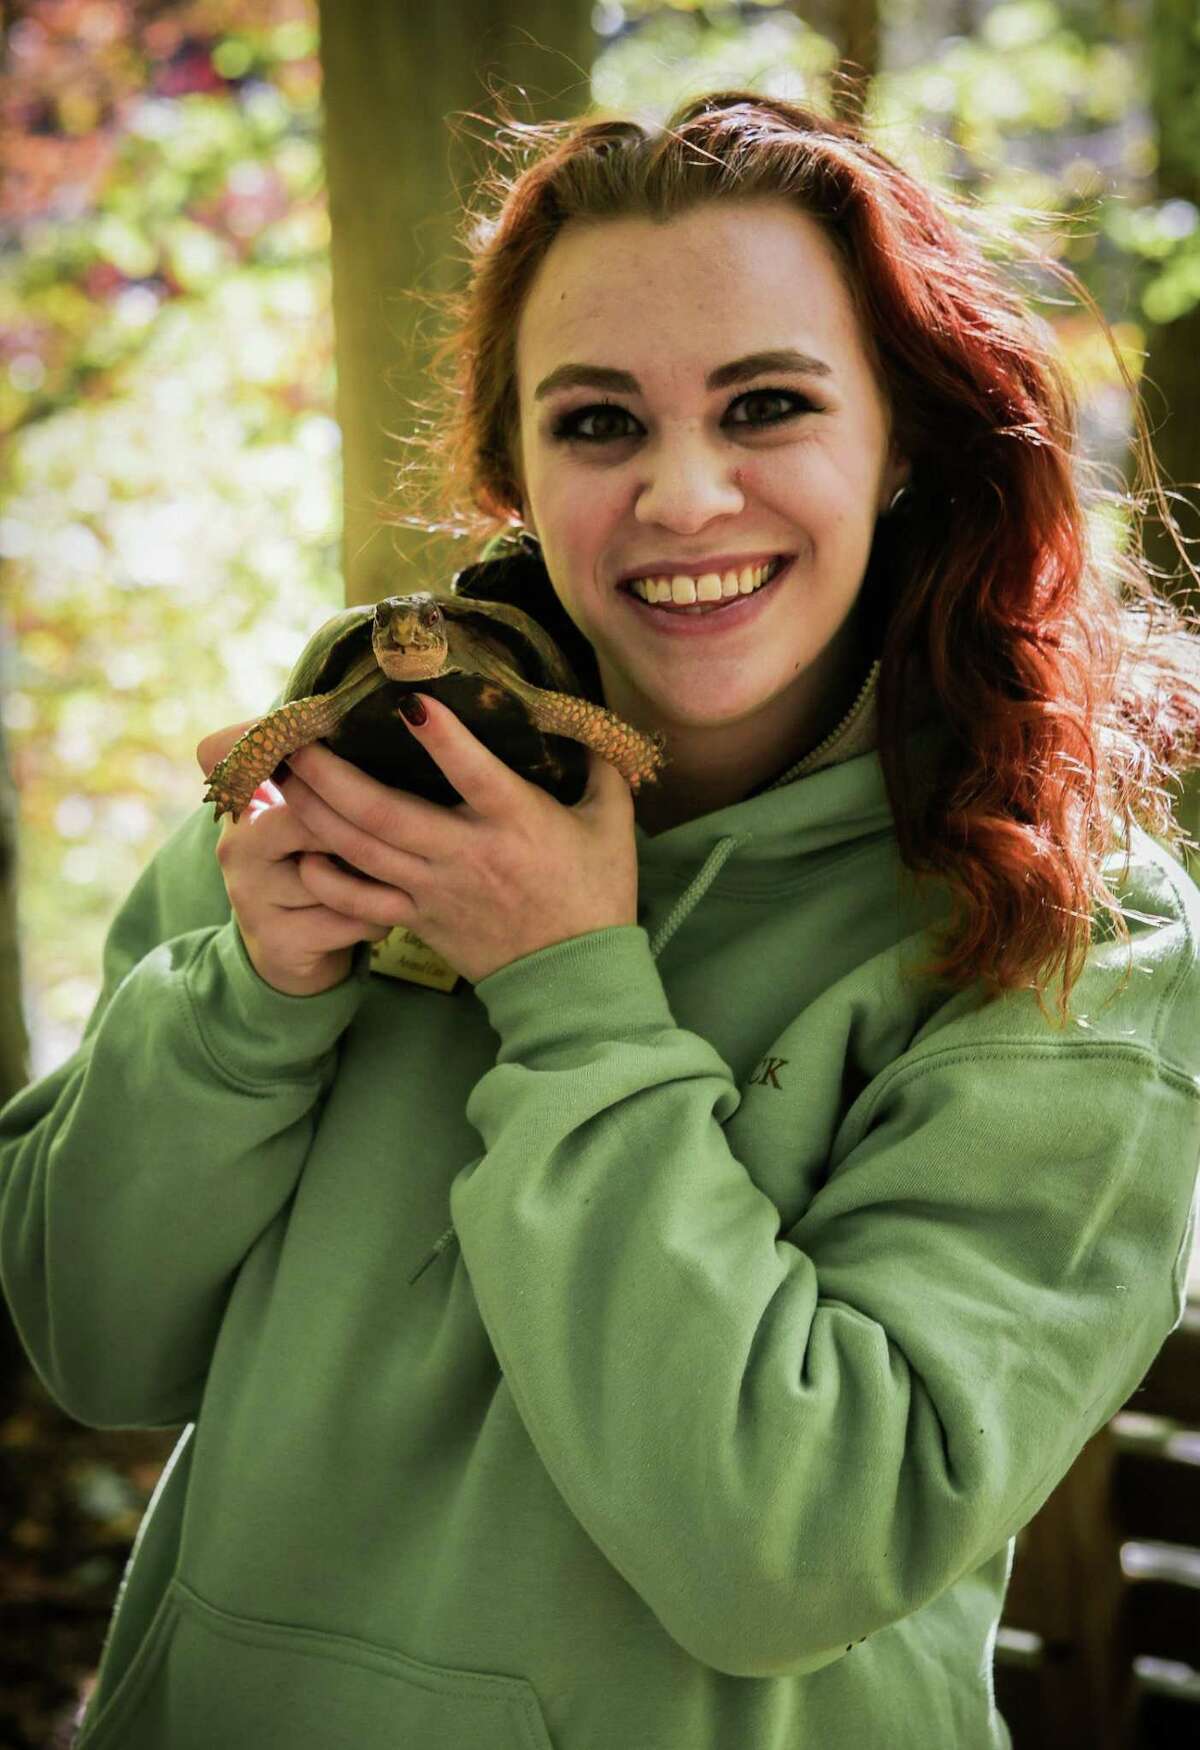 Elma the turtle, held by educator Allegra Jacobs, is one of the ambassador animals from Woodcock Nature Center expected to visit the Nod Hill Brewery on July 26.